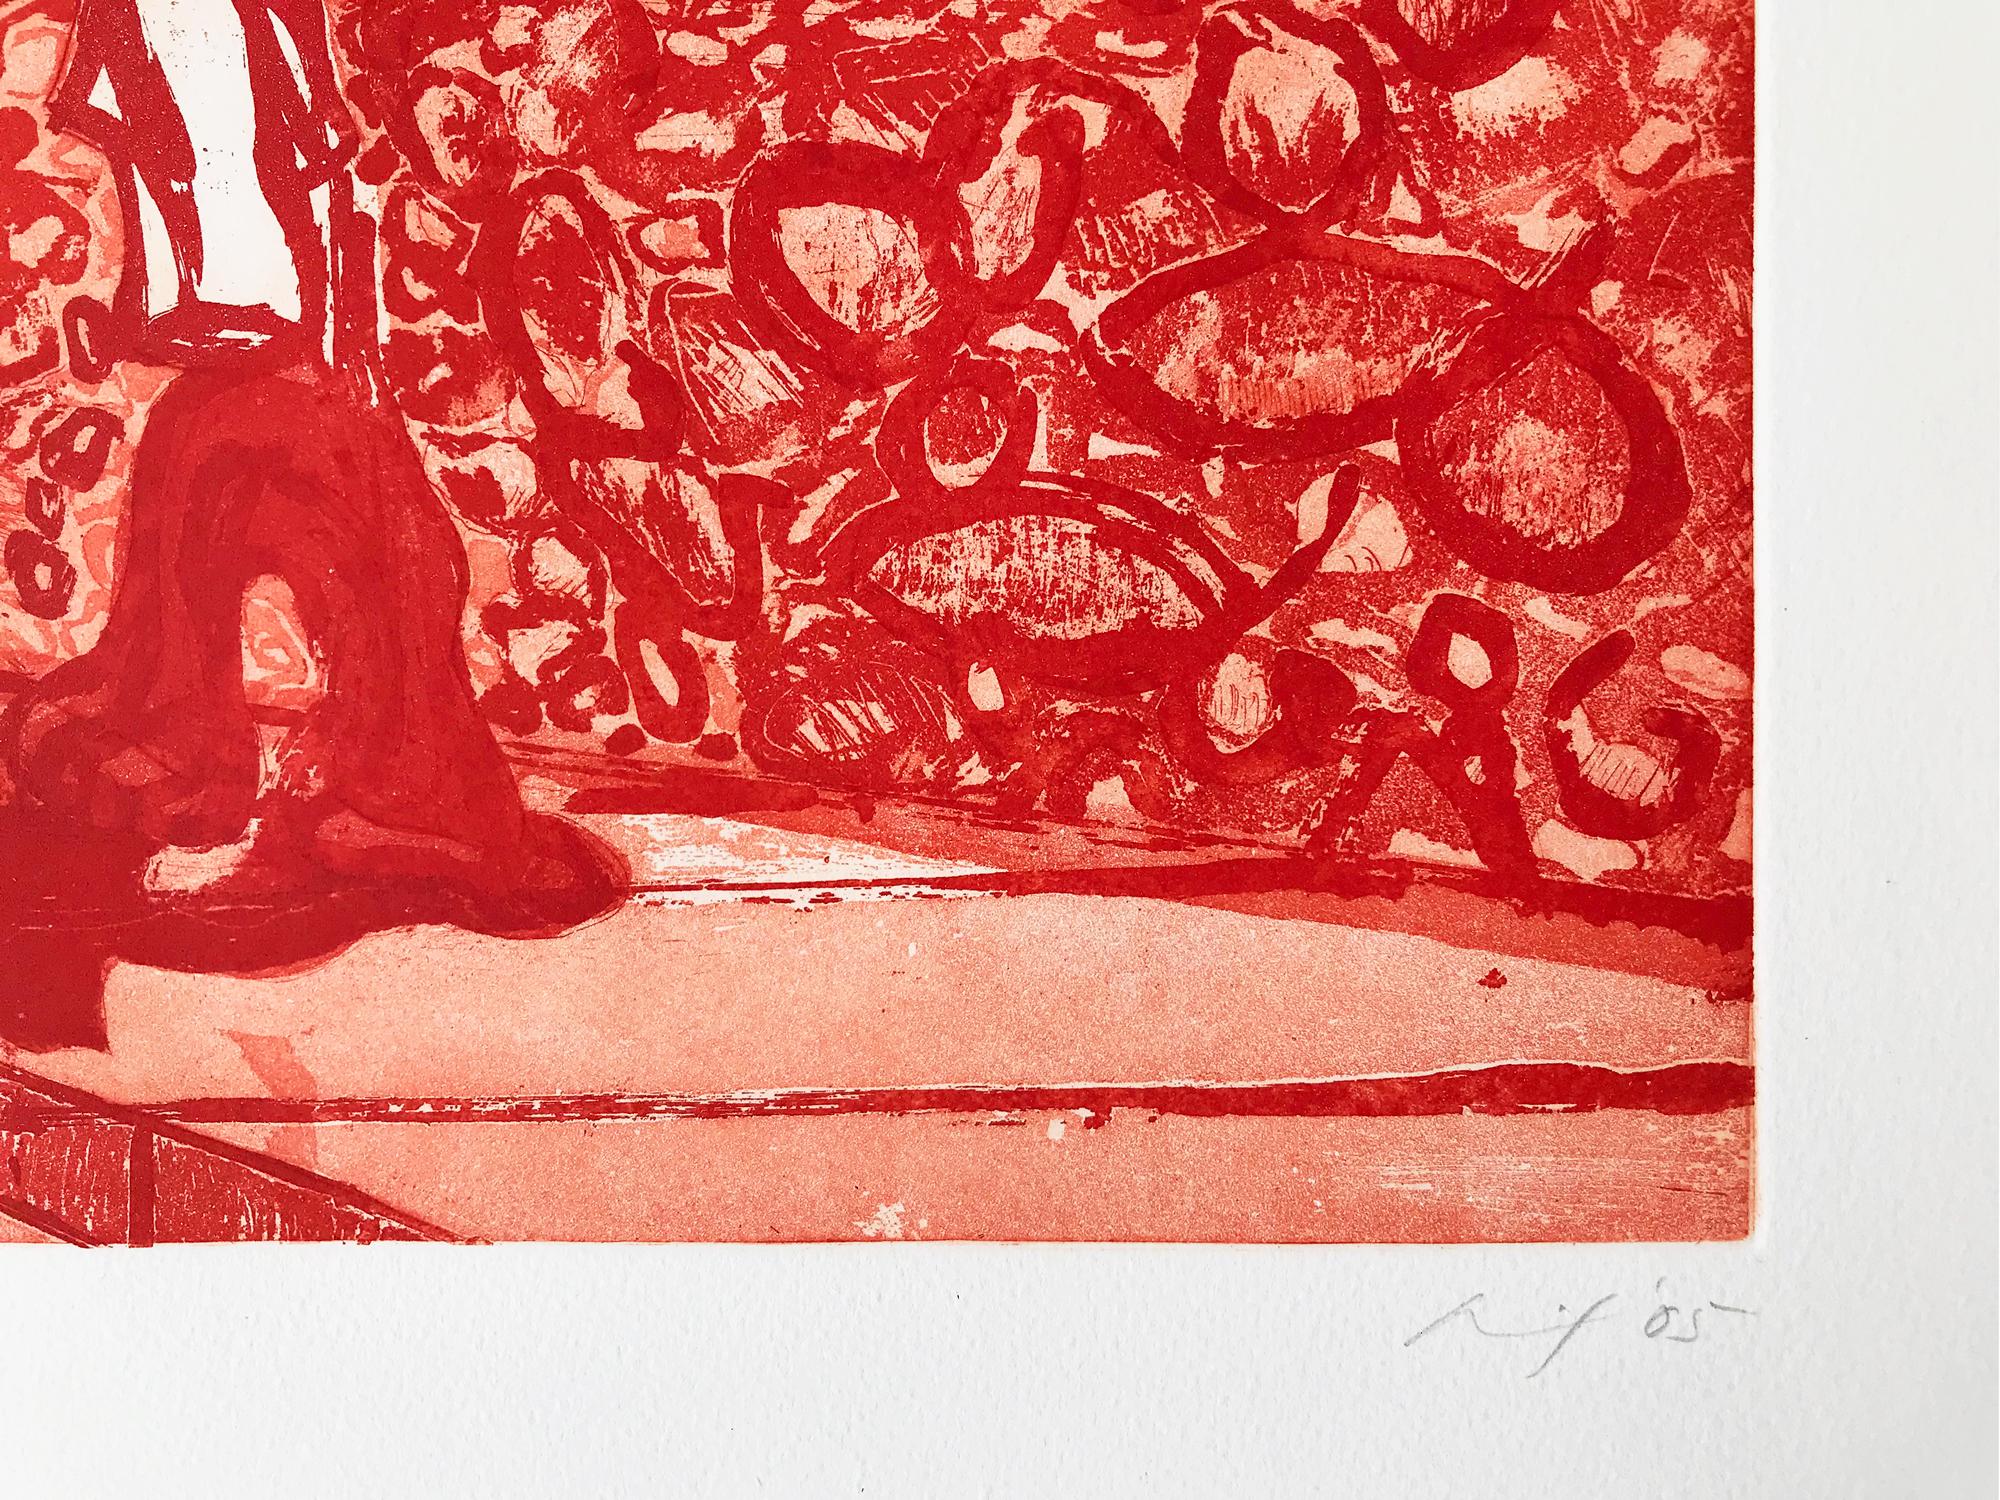 Peter Doig (born 1959 in Edinburgh)
Lapeyrouse Wall, 2005
Medium: Etching with aquatint printed in red on wove paper, with full margins
Dimensions: 29.5 × 39.2 cm (45.4 x 56 cm)
Edition of 35: Hand signed, dated and numbered in pencil
Condition: